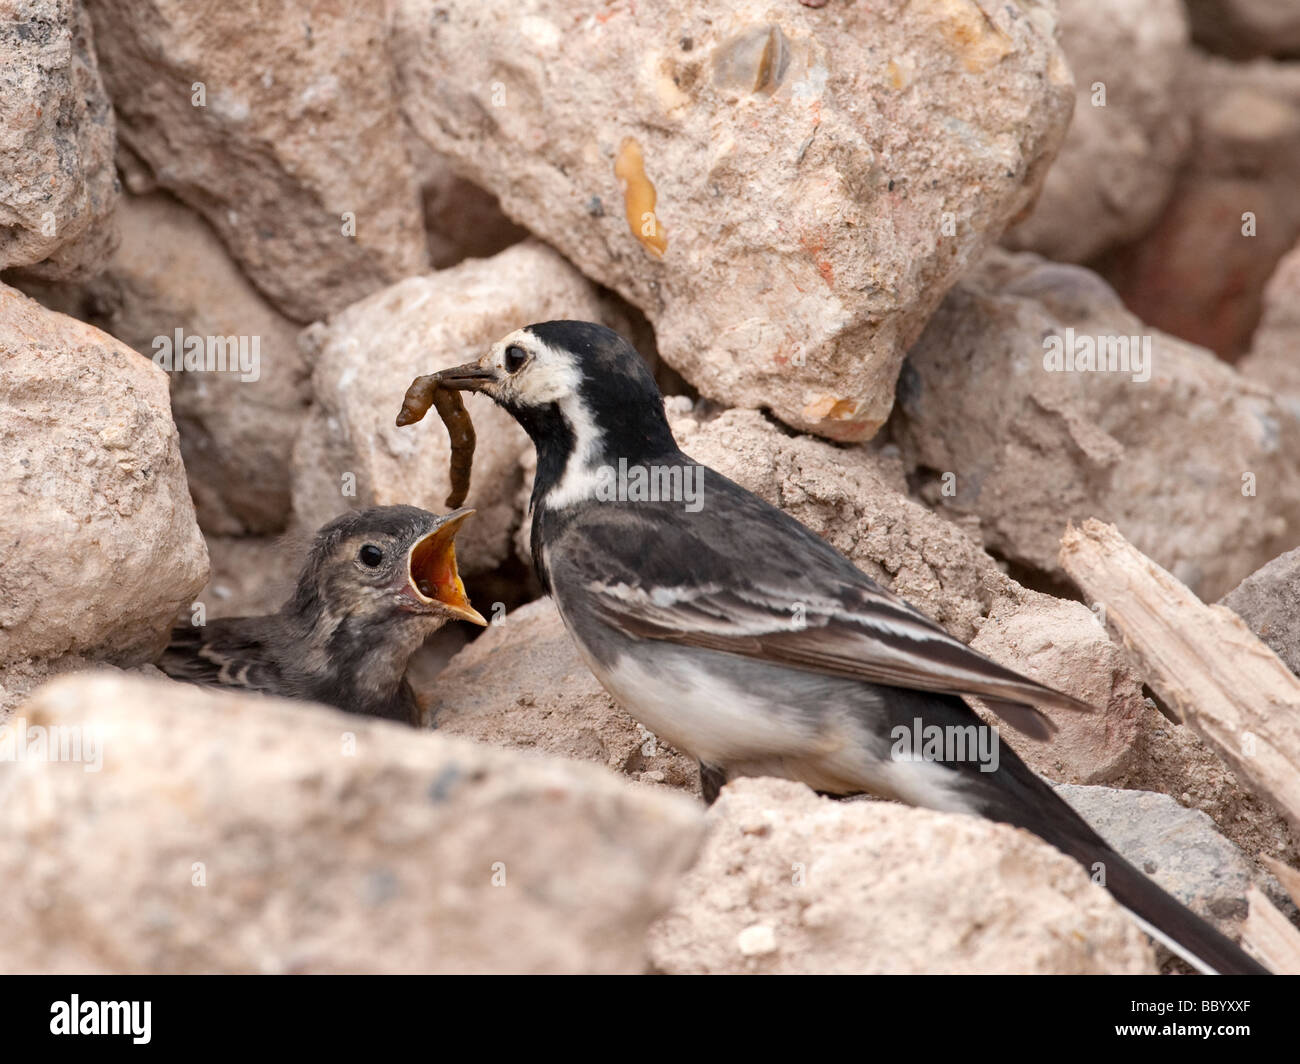 Pied Wagtail (Motacilla alba.) with leatherjacket feeding chicks in nest in stone pile. Stock Photo